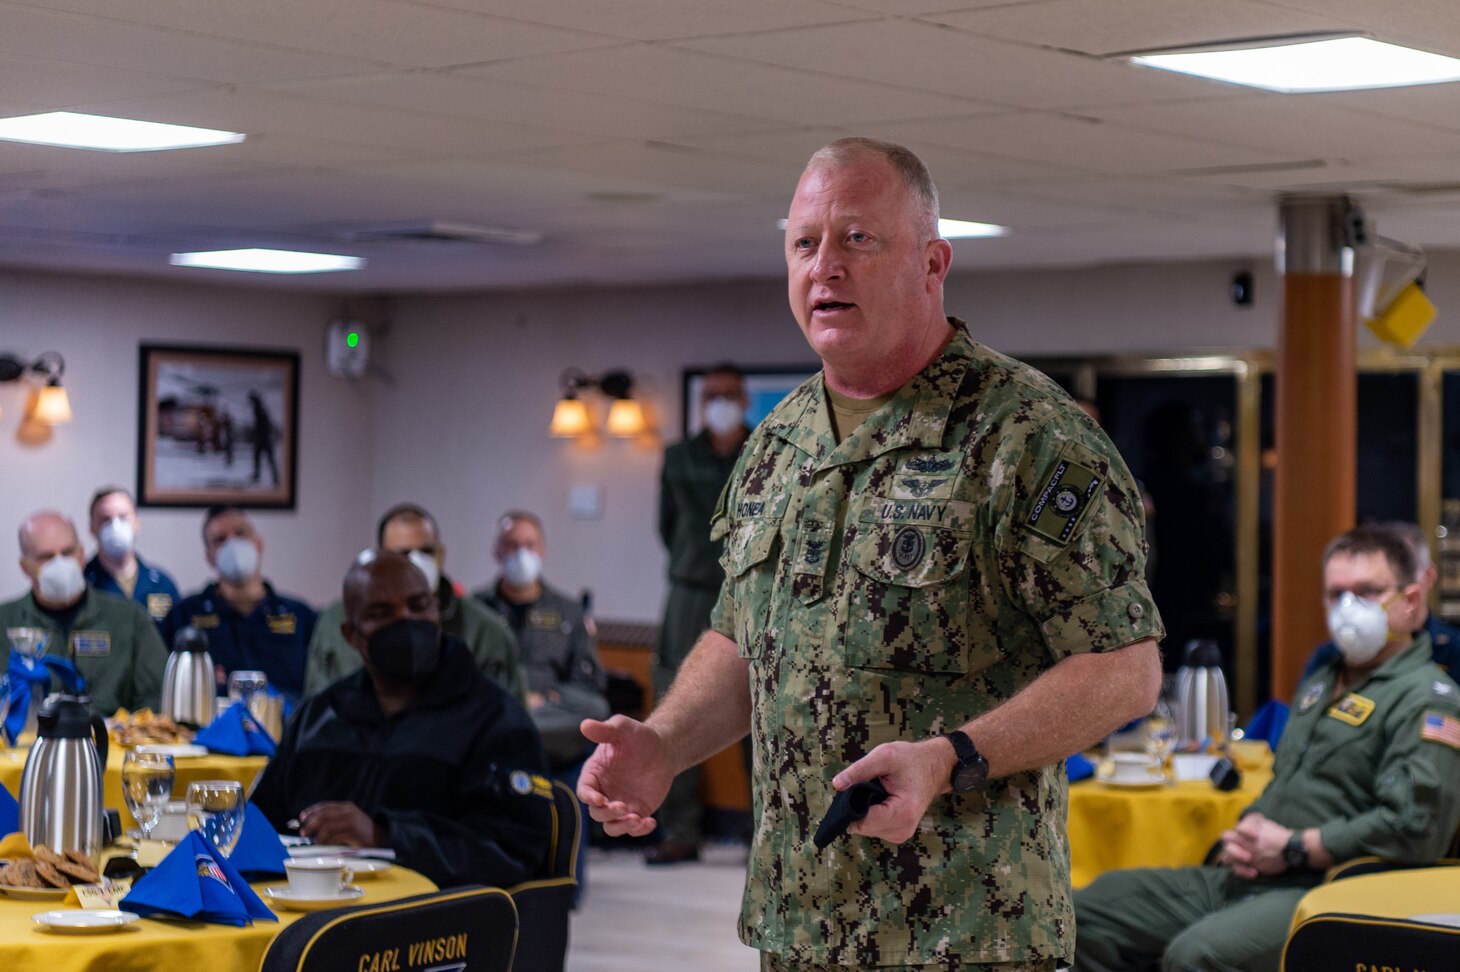 Fleet Master Chief Jim Honea, Fleet Master Chief of U.S. Pacific Fleet, addresses Sailors assigned to Nimitz-class nuclear aircraft carrier USS Carl Vinson (CVN 70) about the Navy’s intolerance to extremist and/or supremacist ideologies.